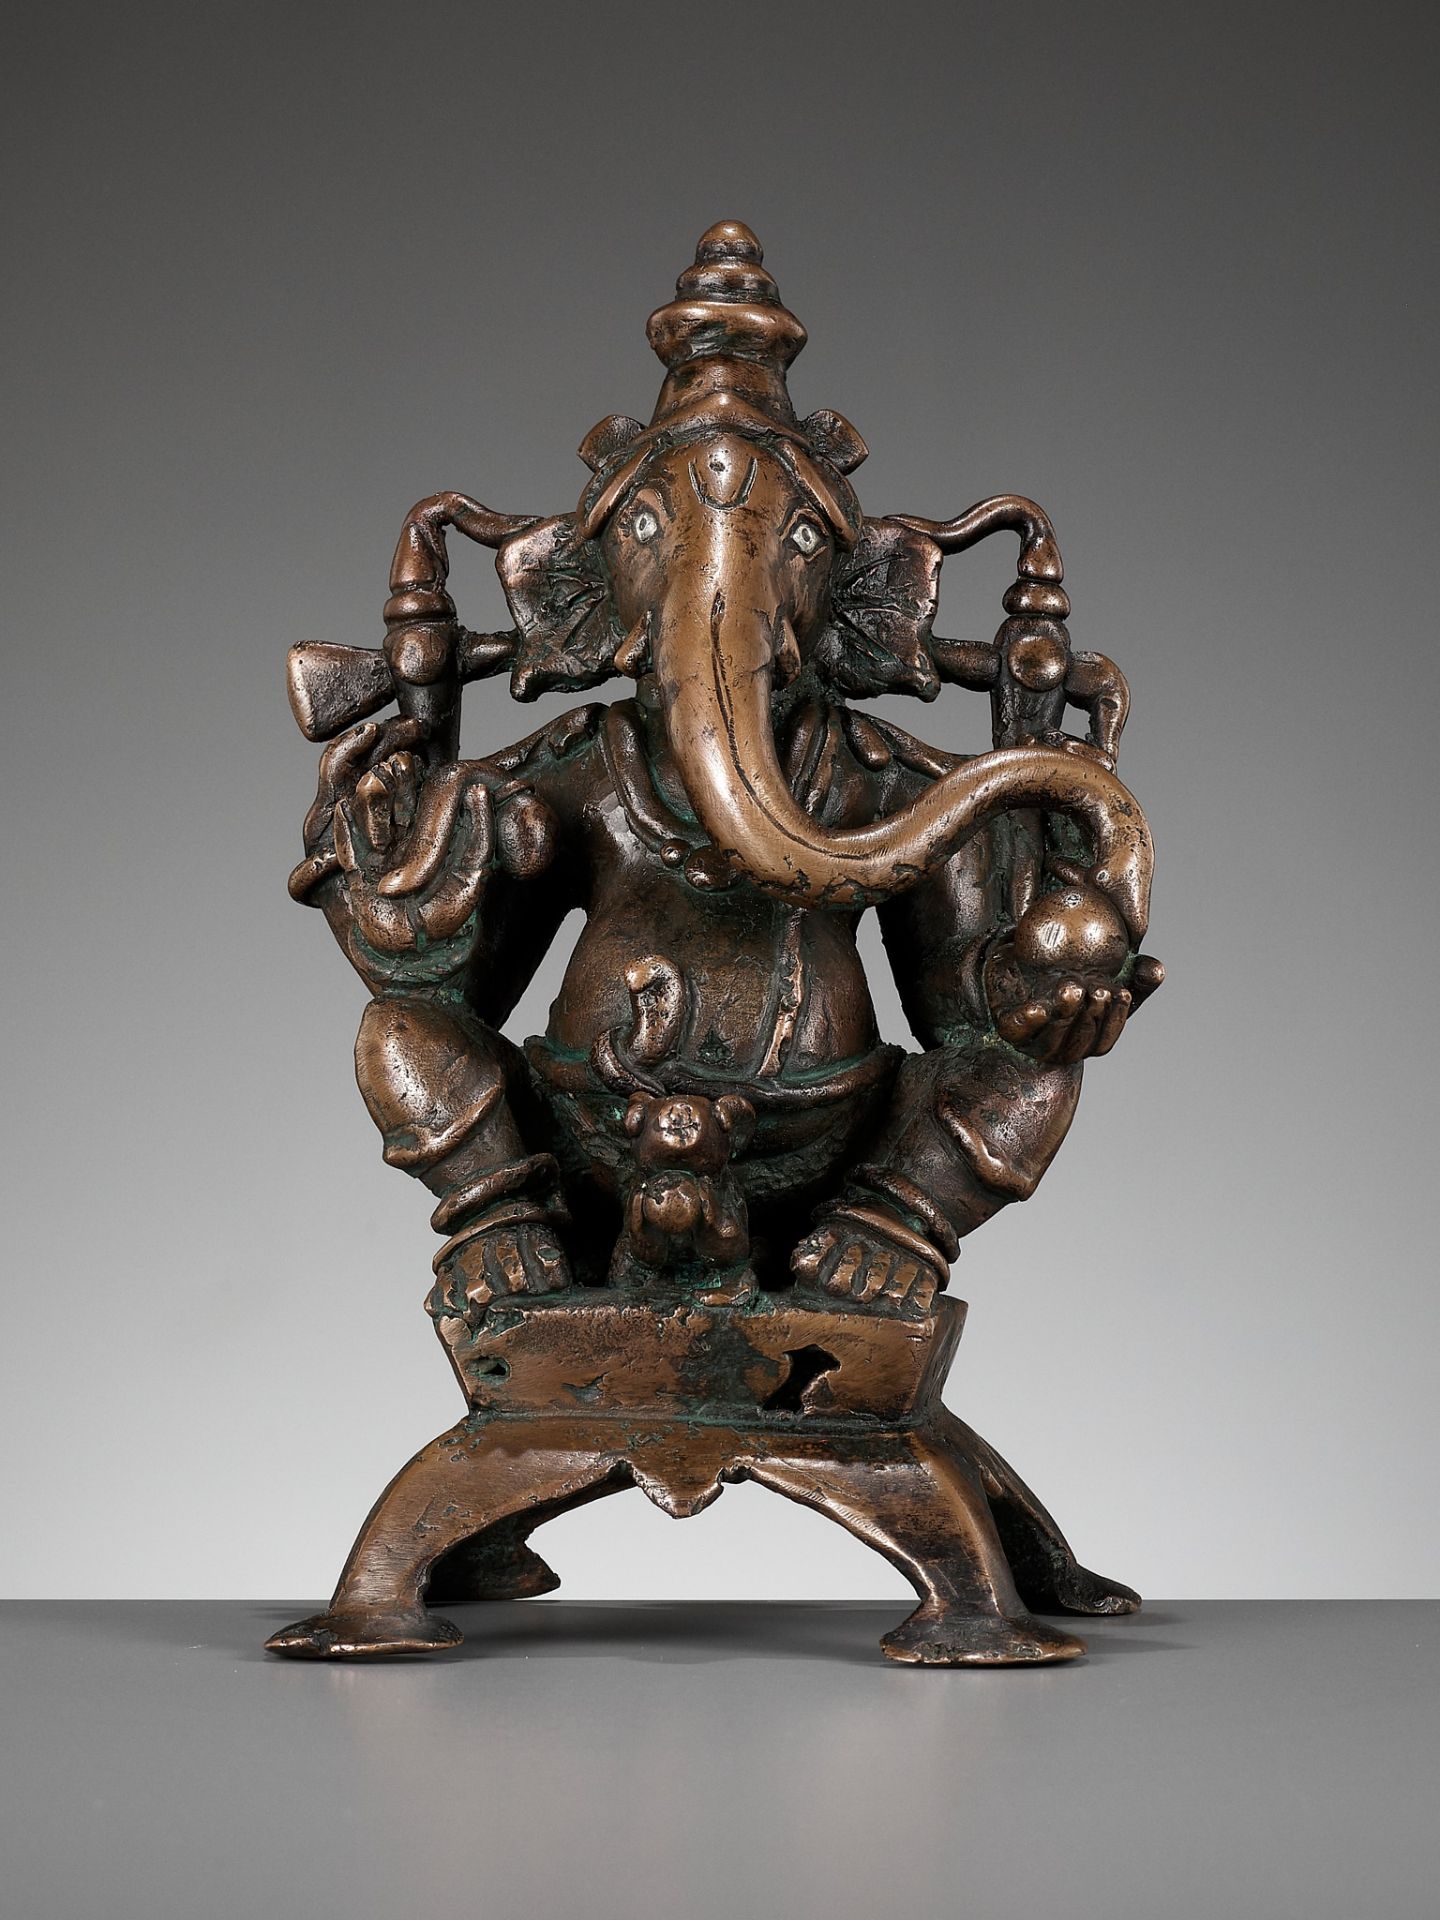 A SILVER-INLAID COPPER ALLOY FIGURE OF GANESHA, SOUTH INDIA, C. 1650-1750